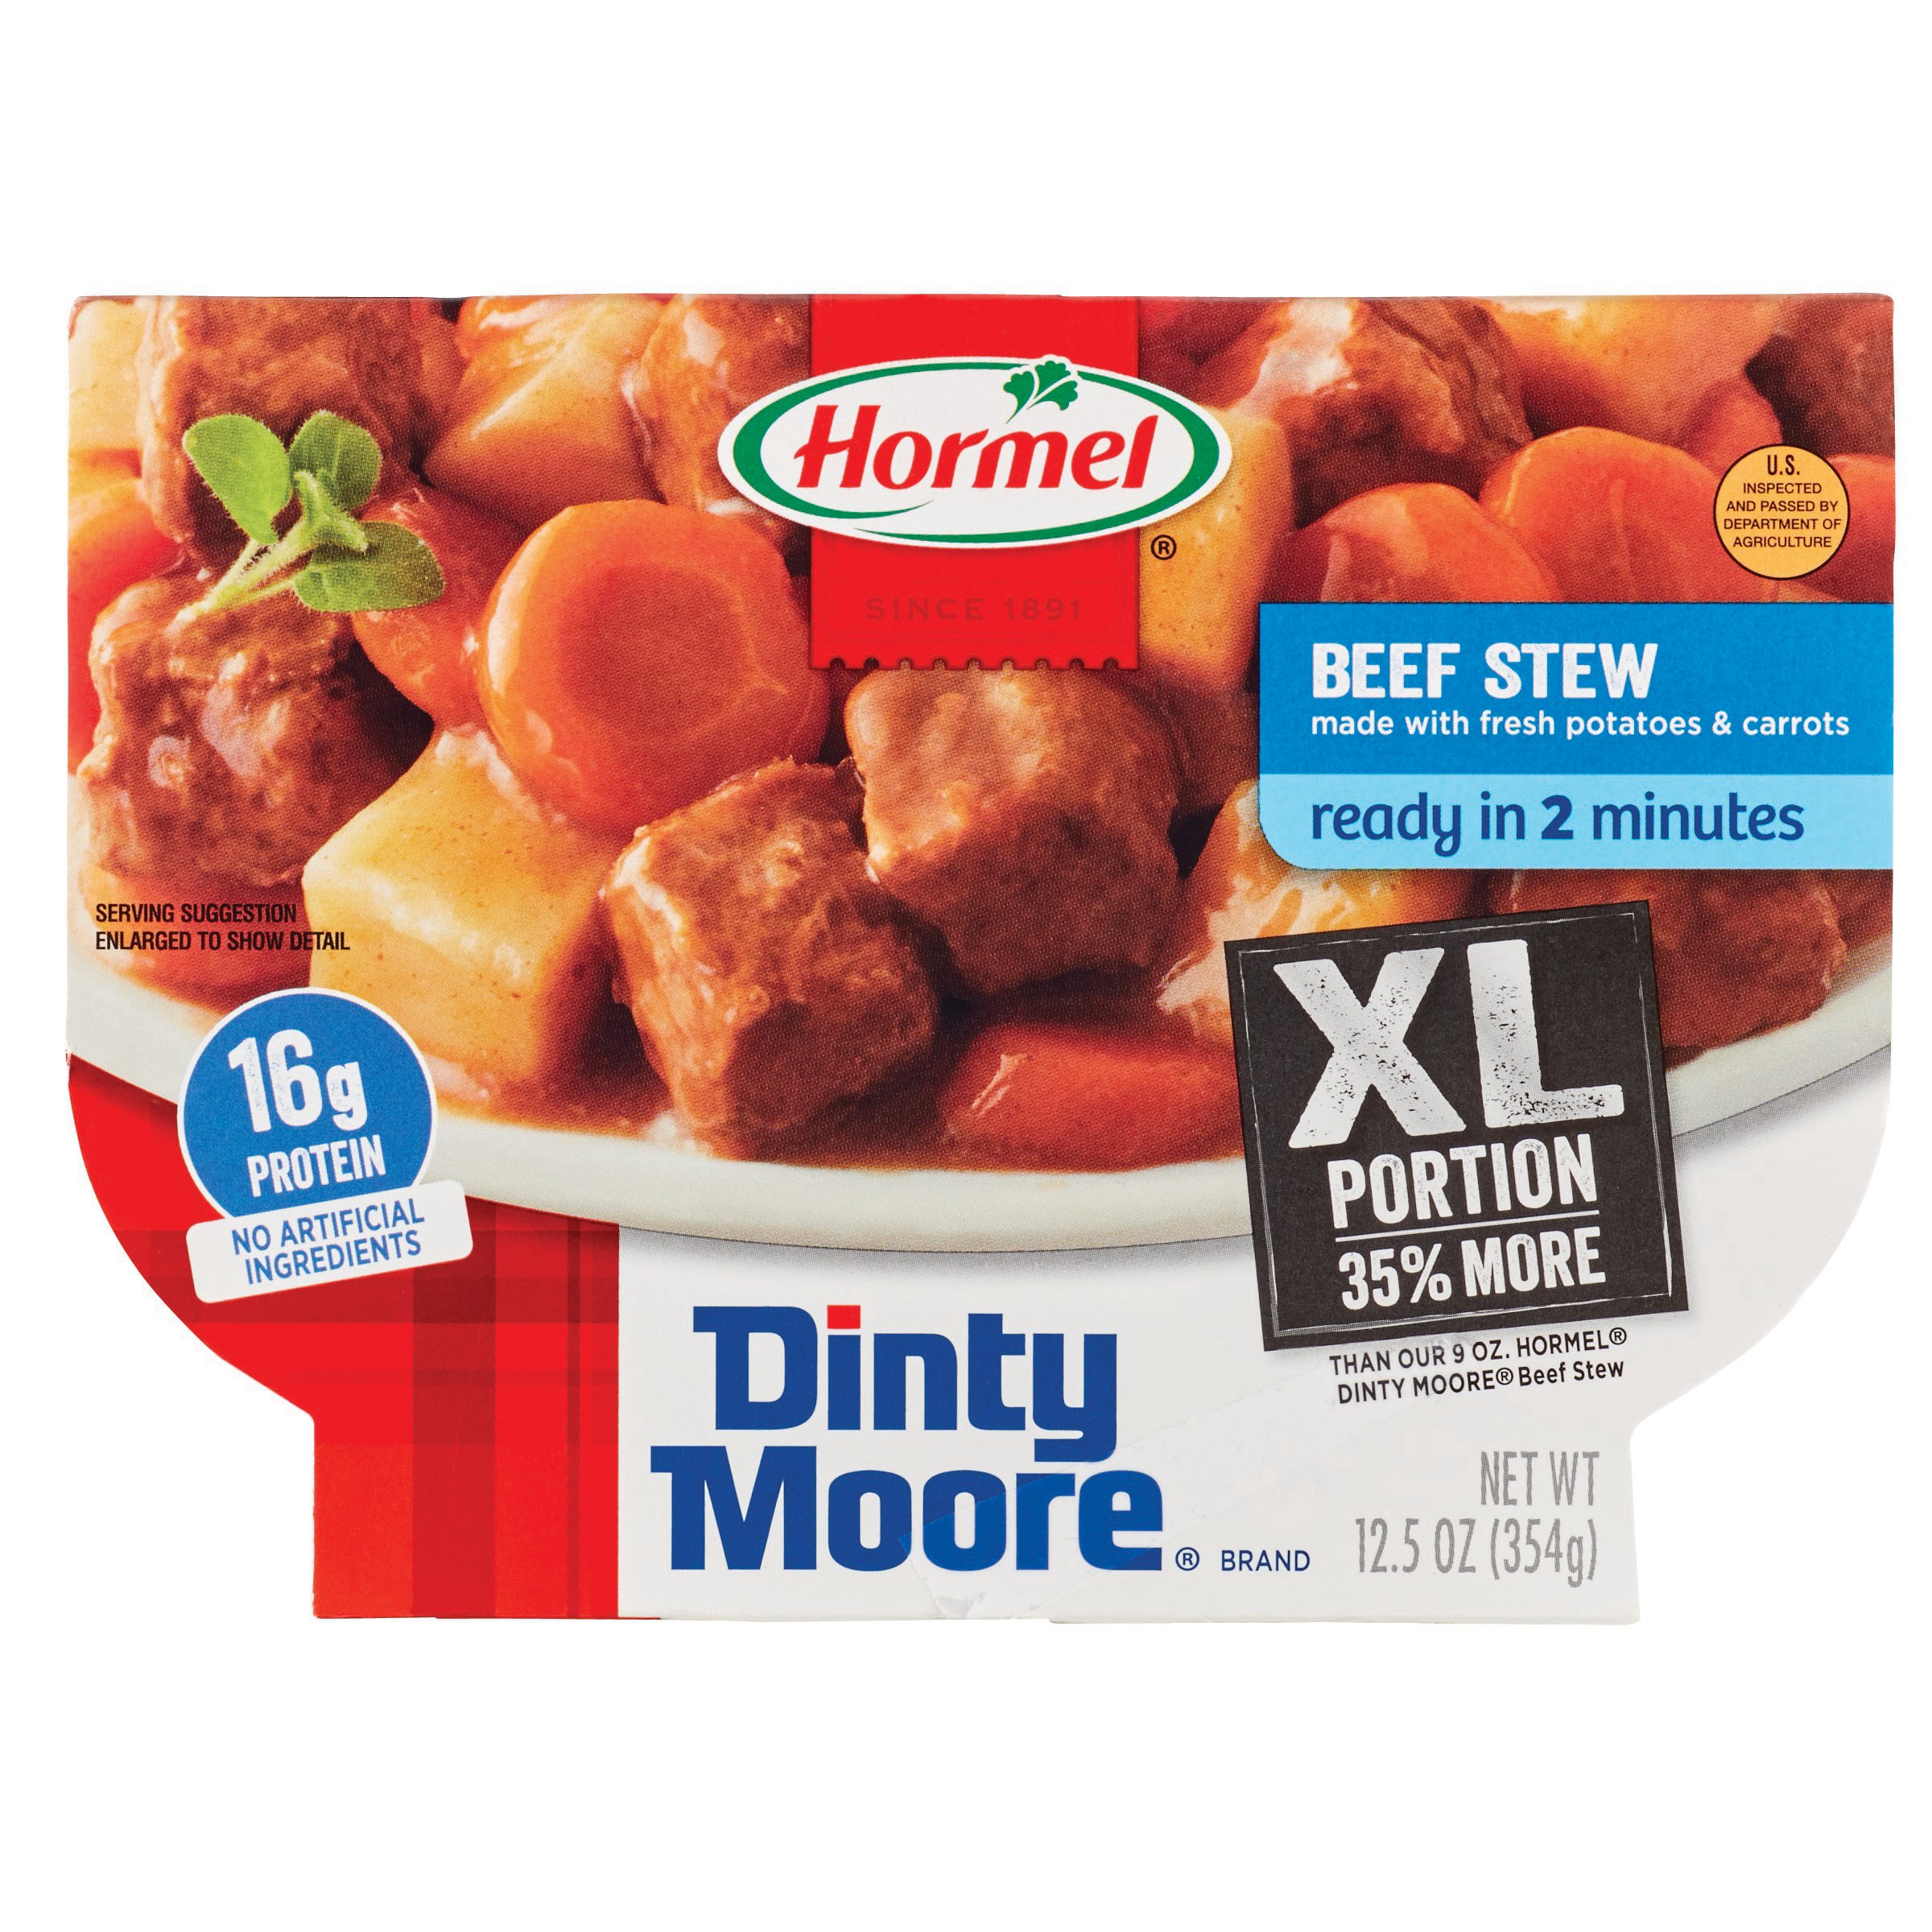 Hormel Dinty Moore XL Portion Beef Stew - Shop Pantry ...